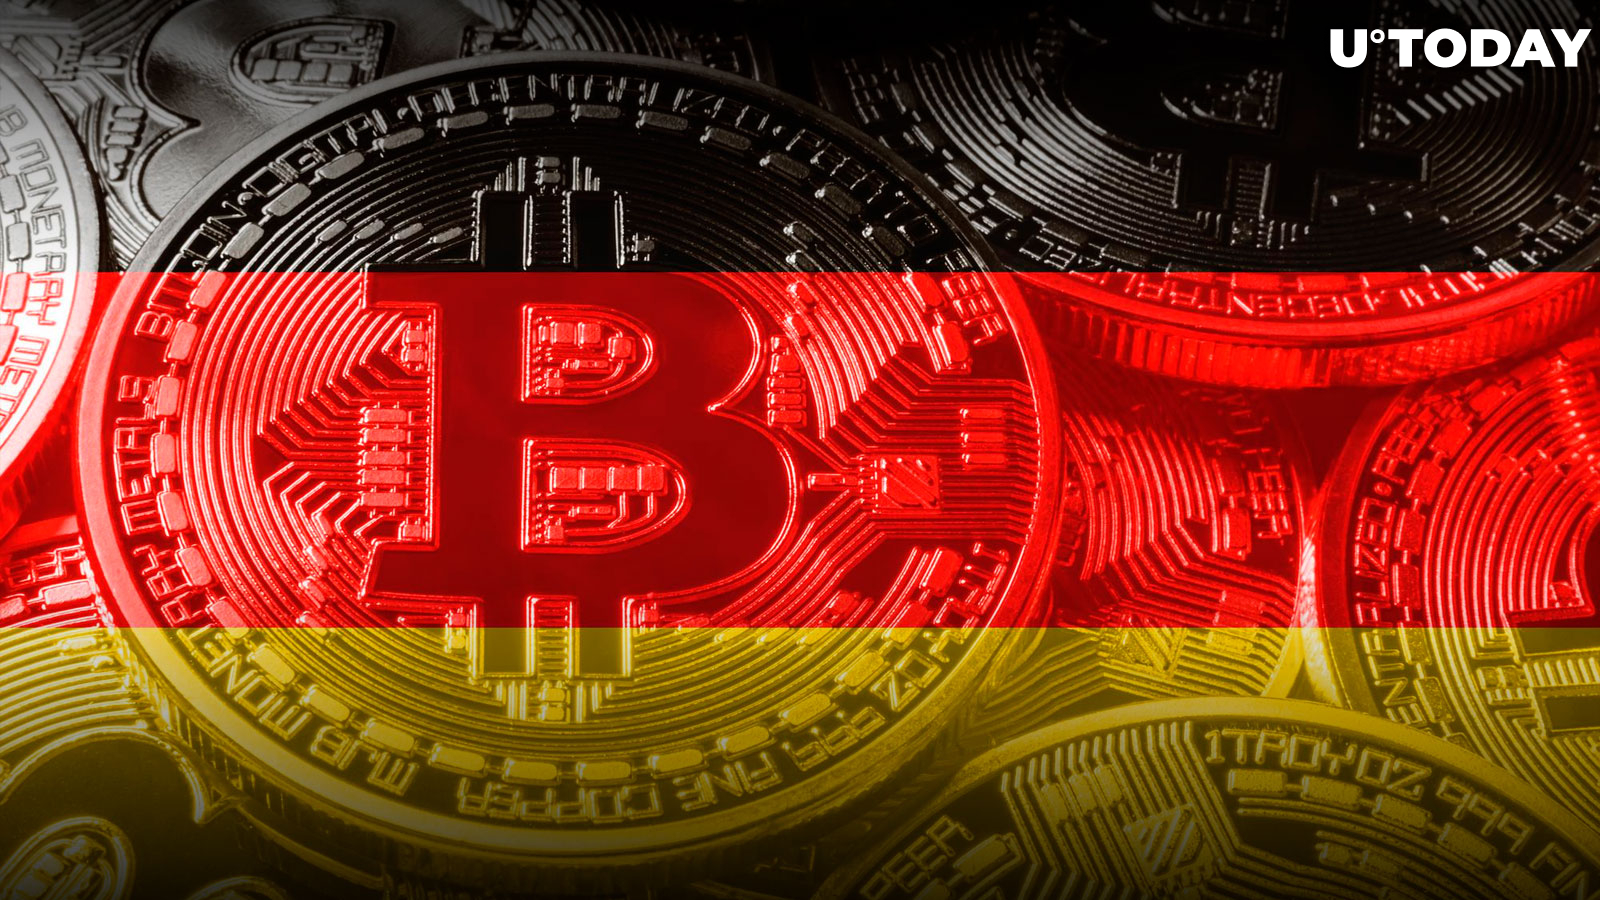 €2 Billion in Bitcoin Seized by German Authorities